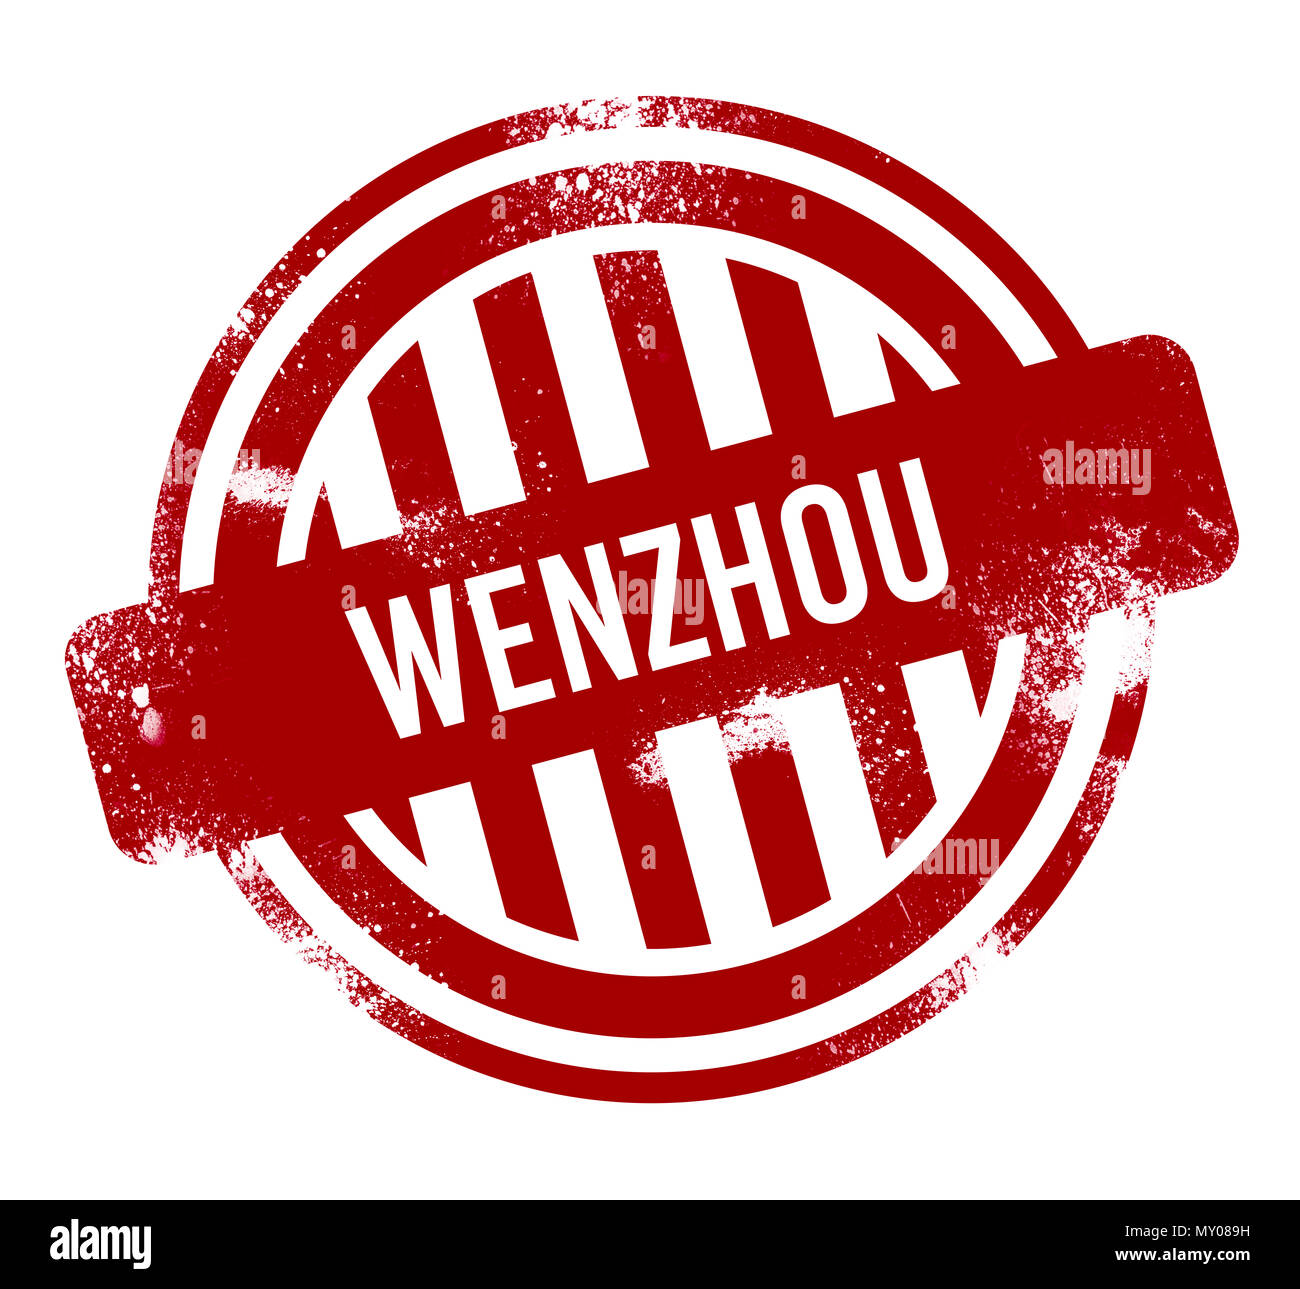 Wenzhou Cut Out Stock Images & Pictures - Alamy